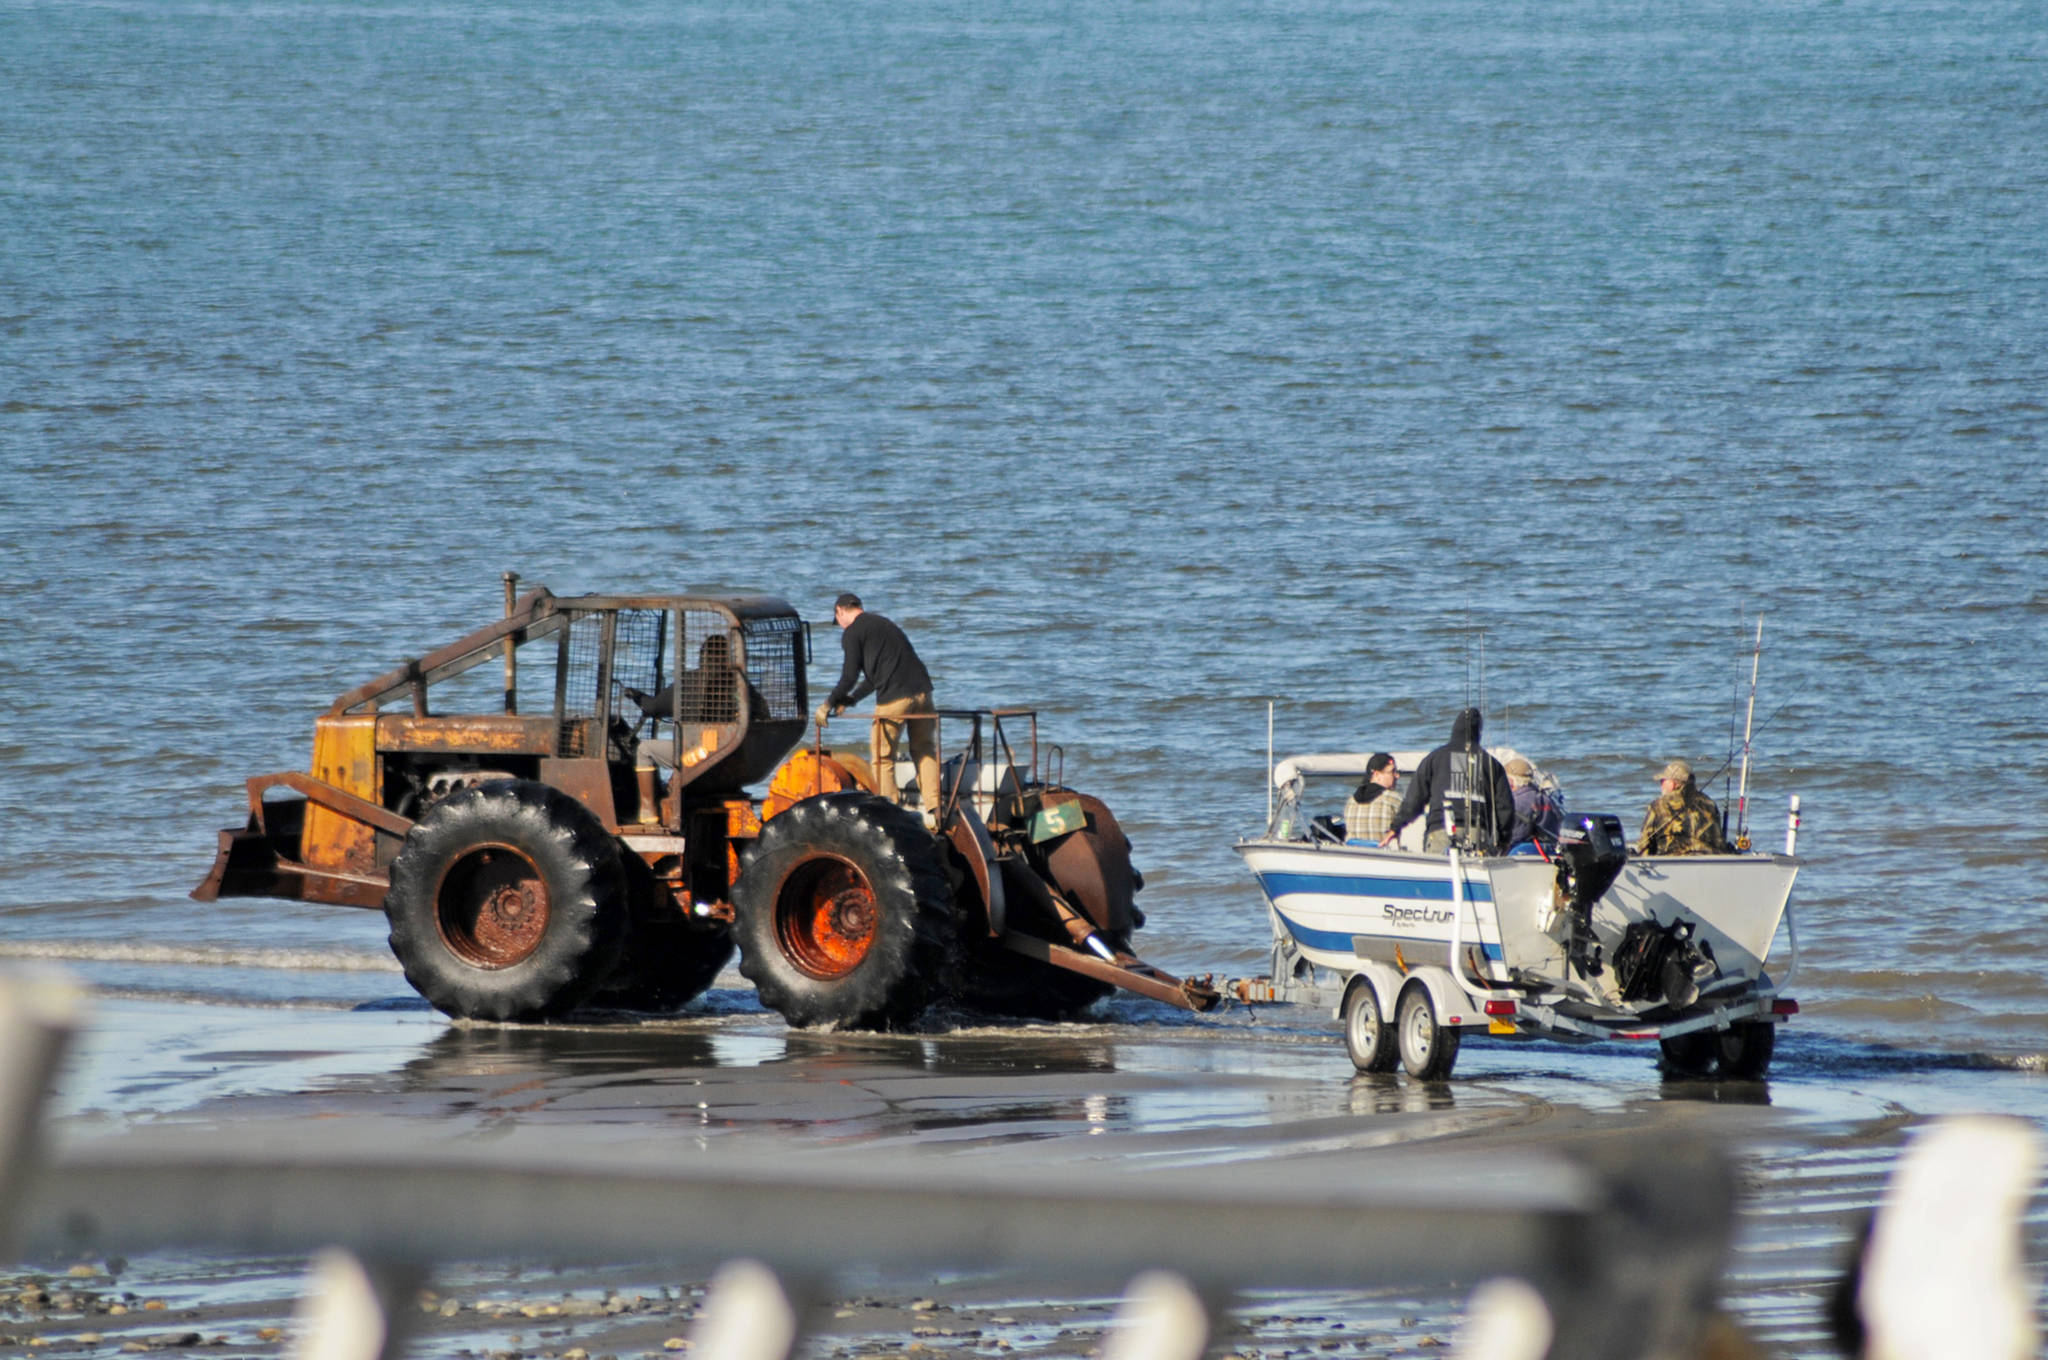 Anglers prepare to head out onto Cook Inlet from the tractor launch at Deep Creek State Recreation Site on Sunday, May 28, 2018 in Ninilchik, Alaska. Halibut fishing has been reportedly fair so far this year, with anglers regularly landing halibut smaller than 100 pounds and a few over 100 pounds out of Ninilchik. (Photo by Elizabeth Earl/Peninsula Clarion)